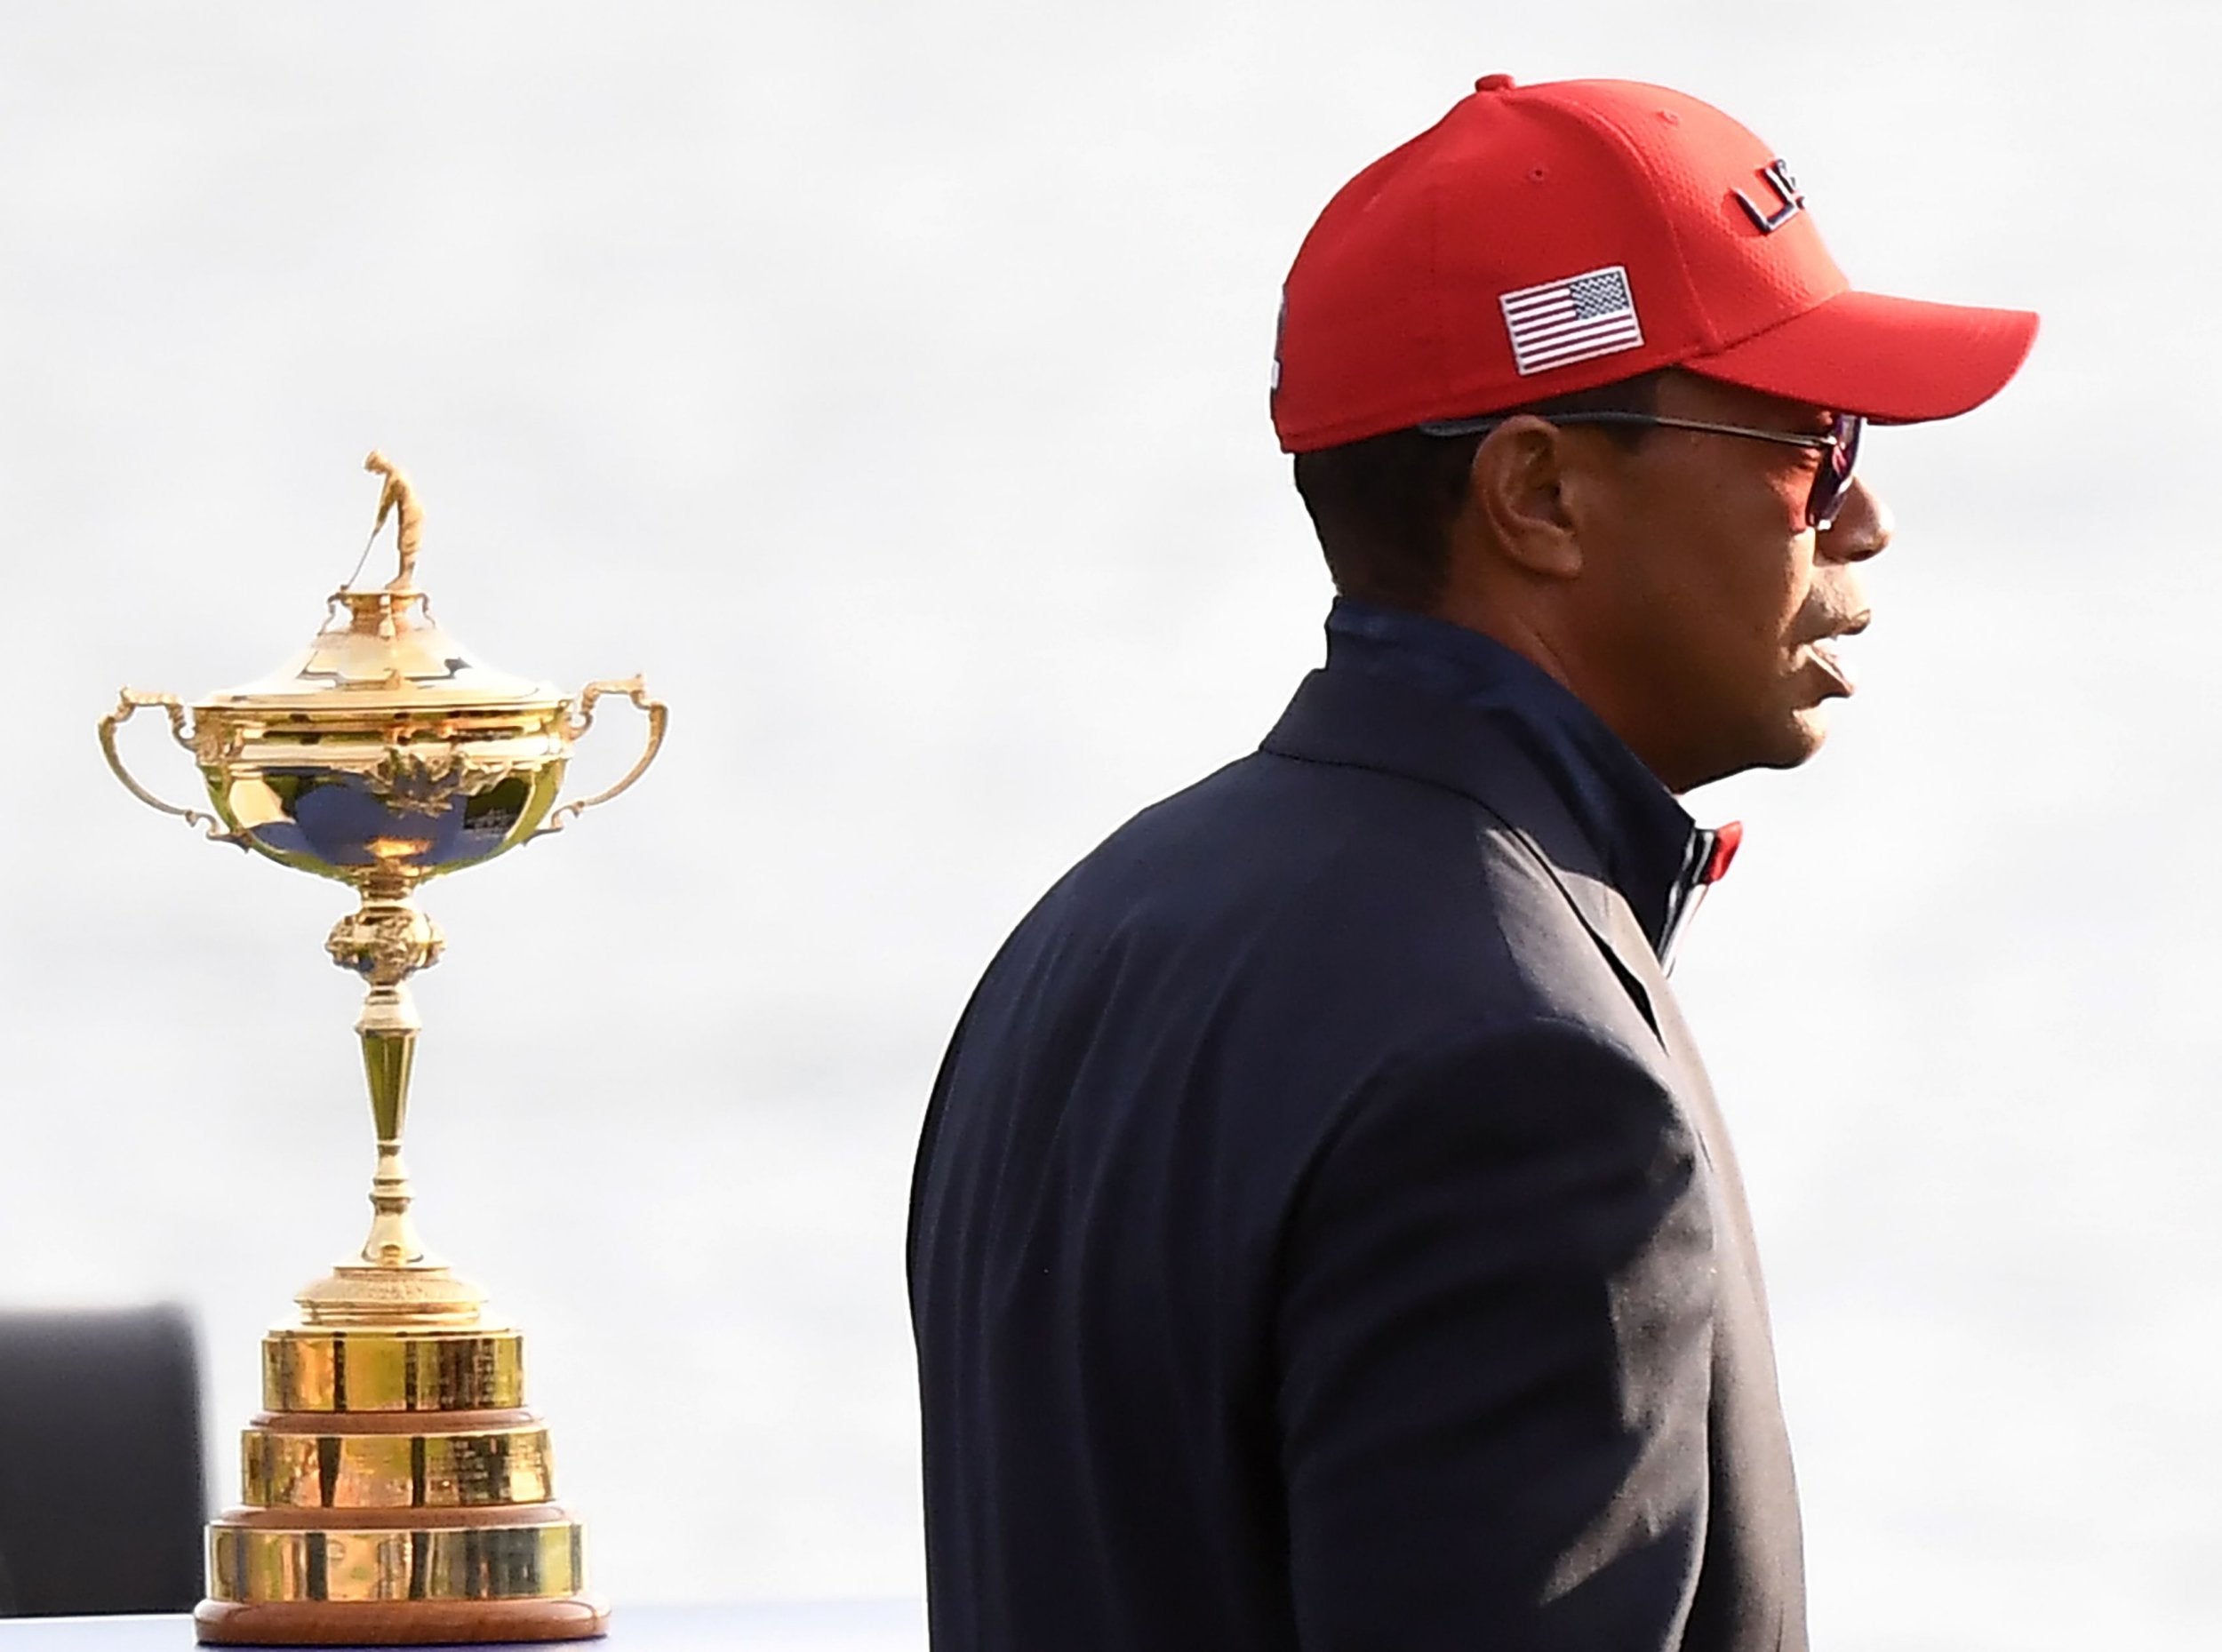 Woods ended pointless on a weekend to forget for him and his team